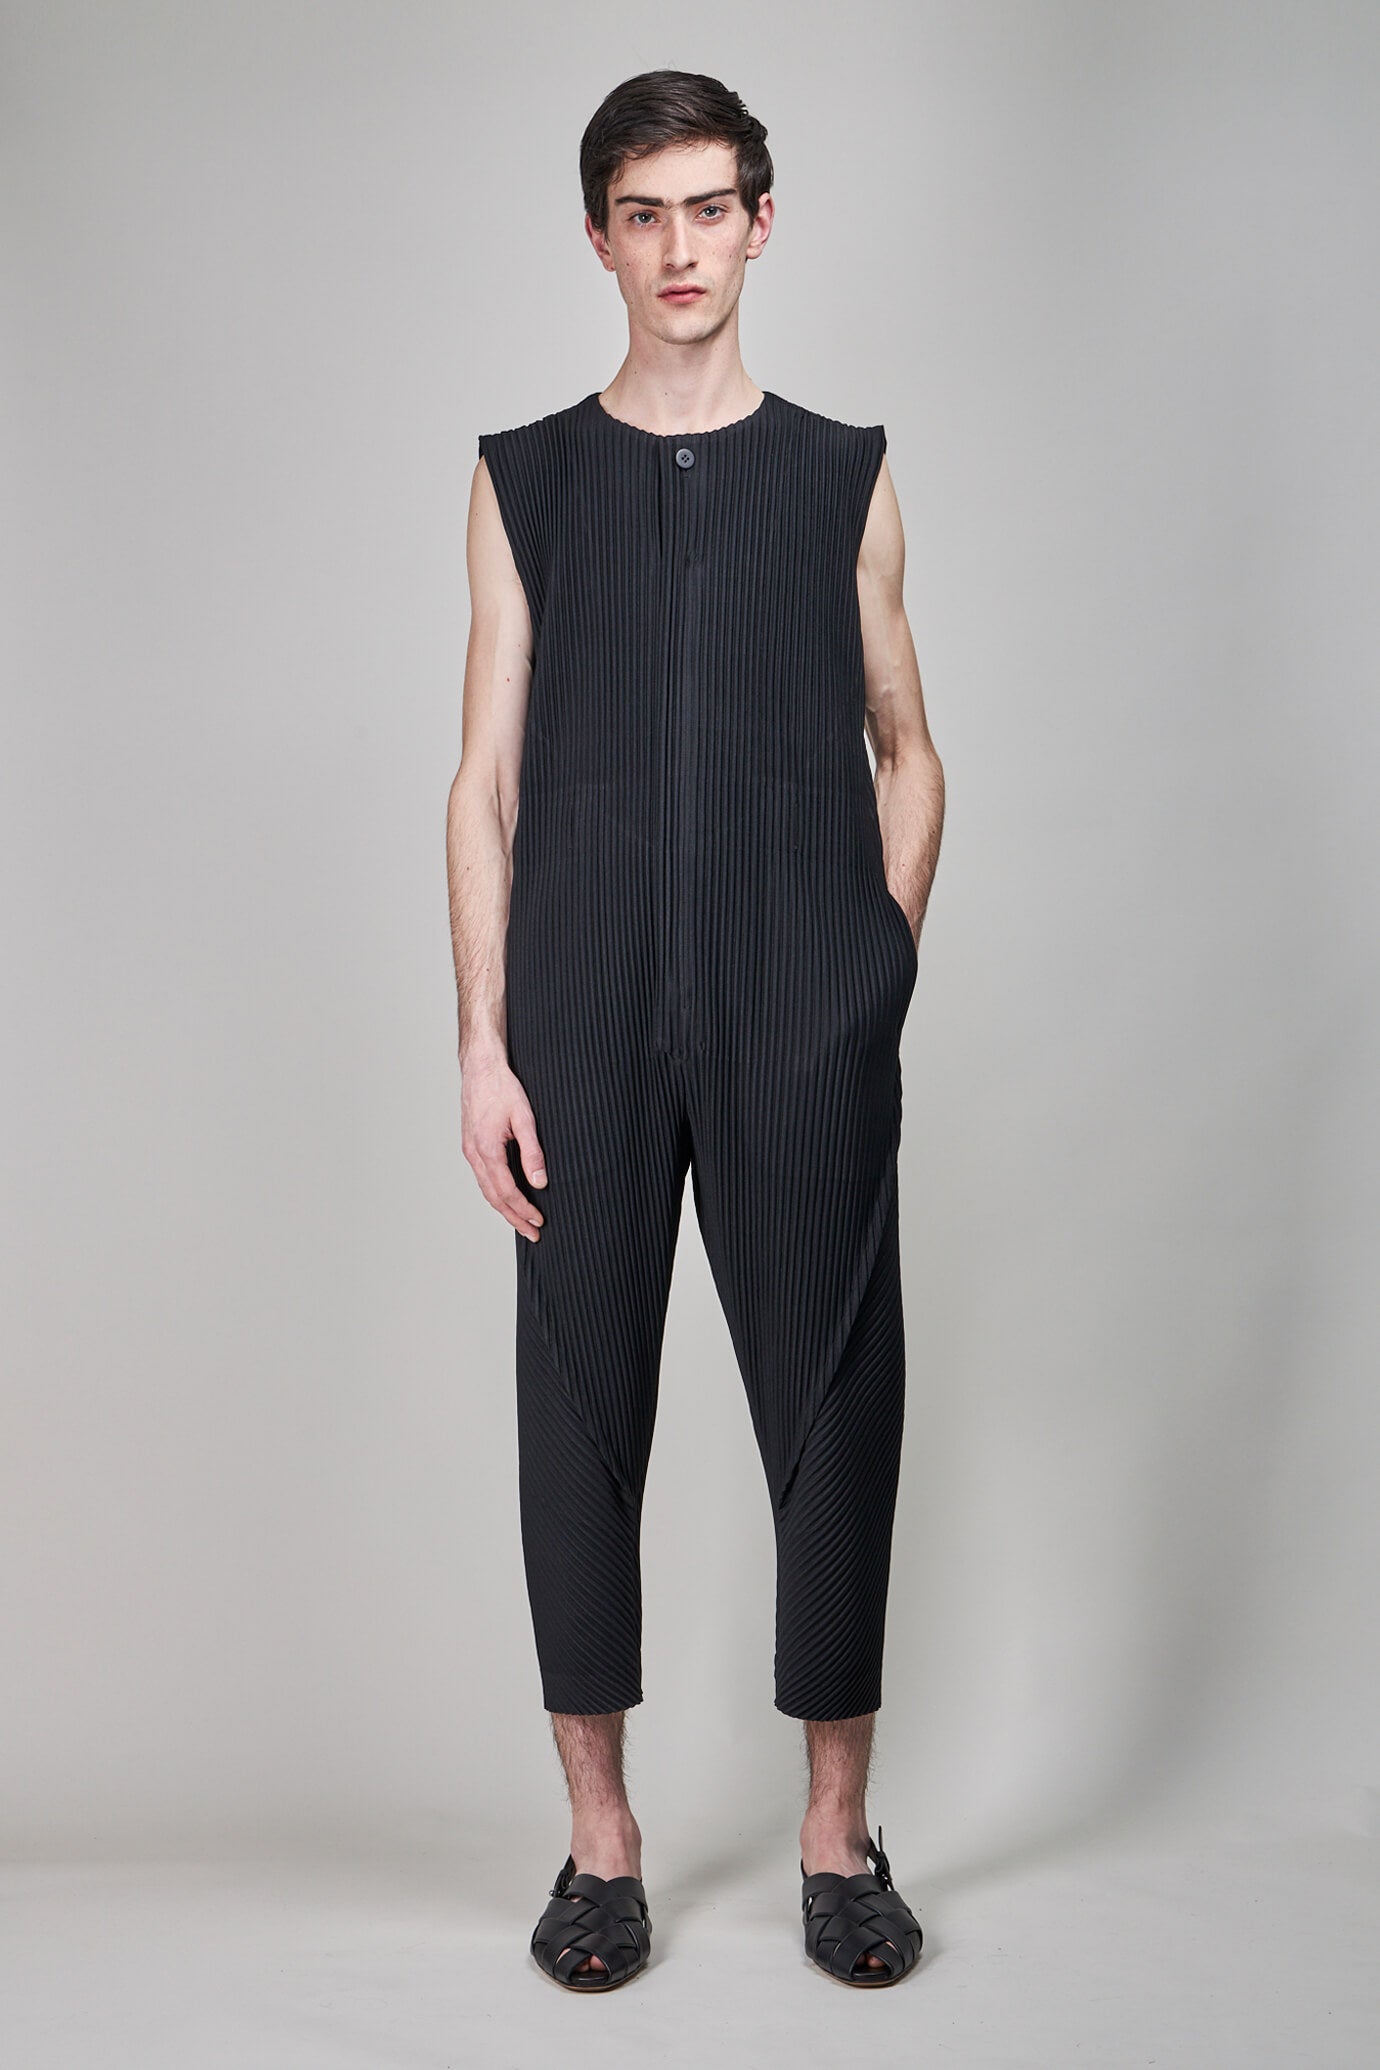 Homme Plissé Issey Miyake – Page 2 – LABELS